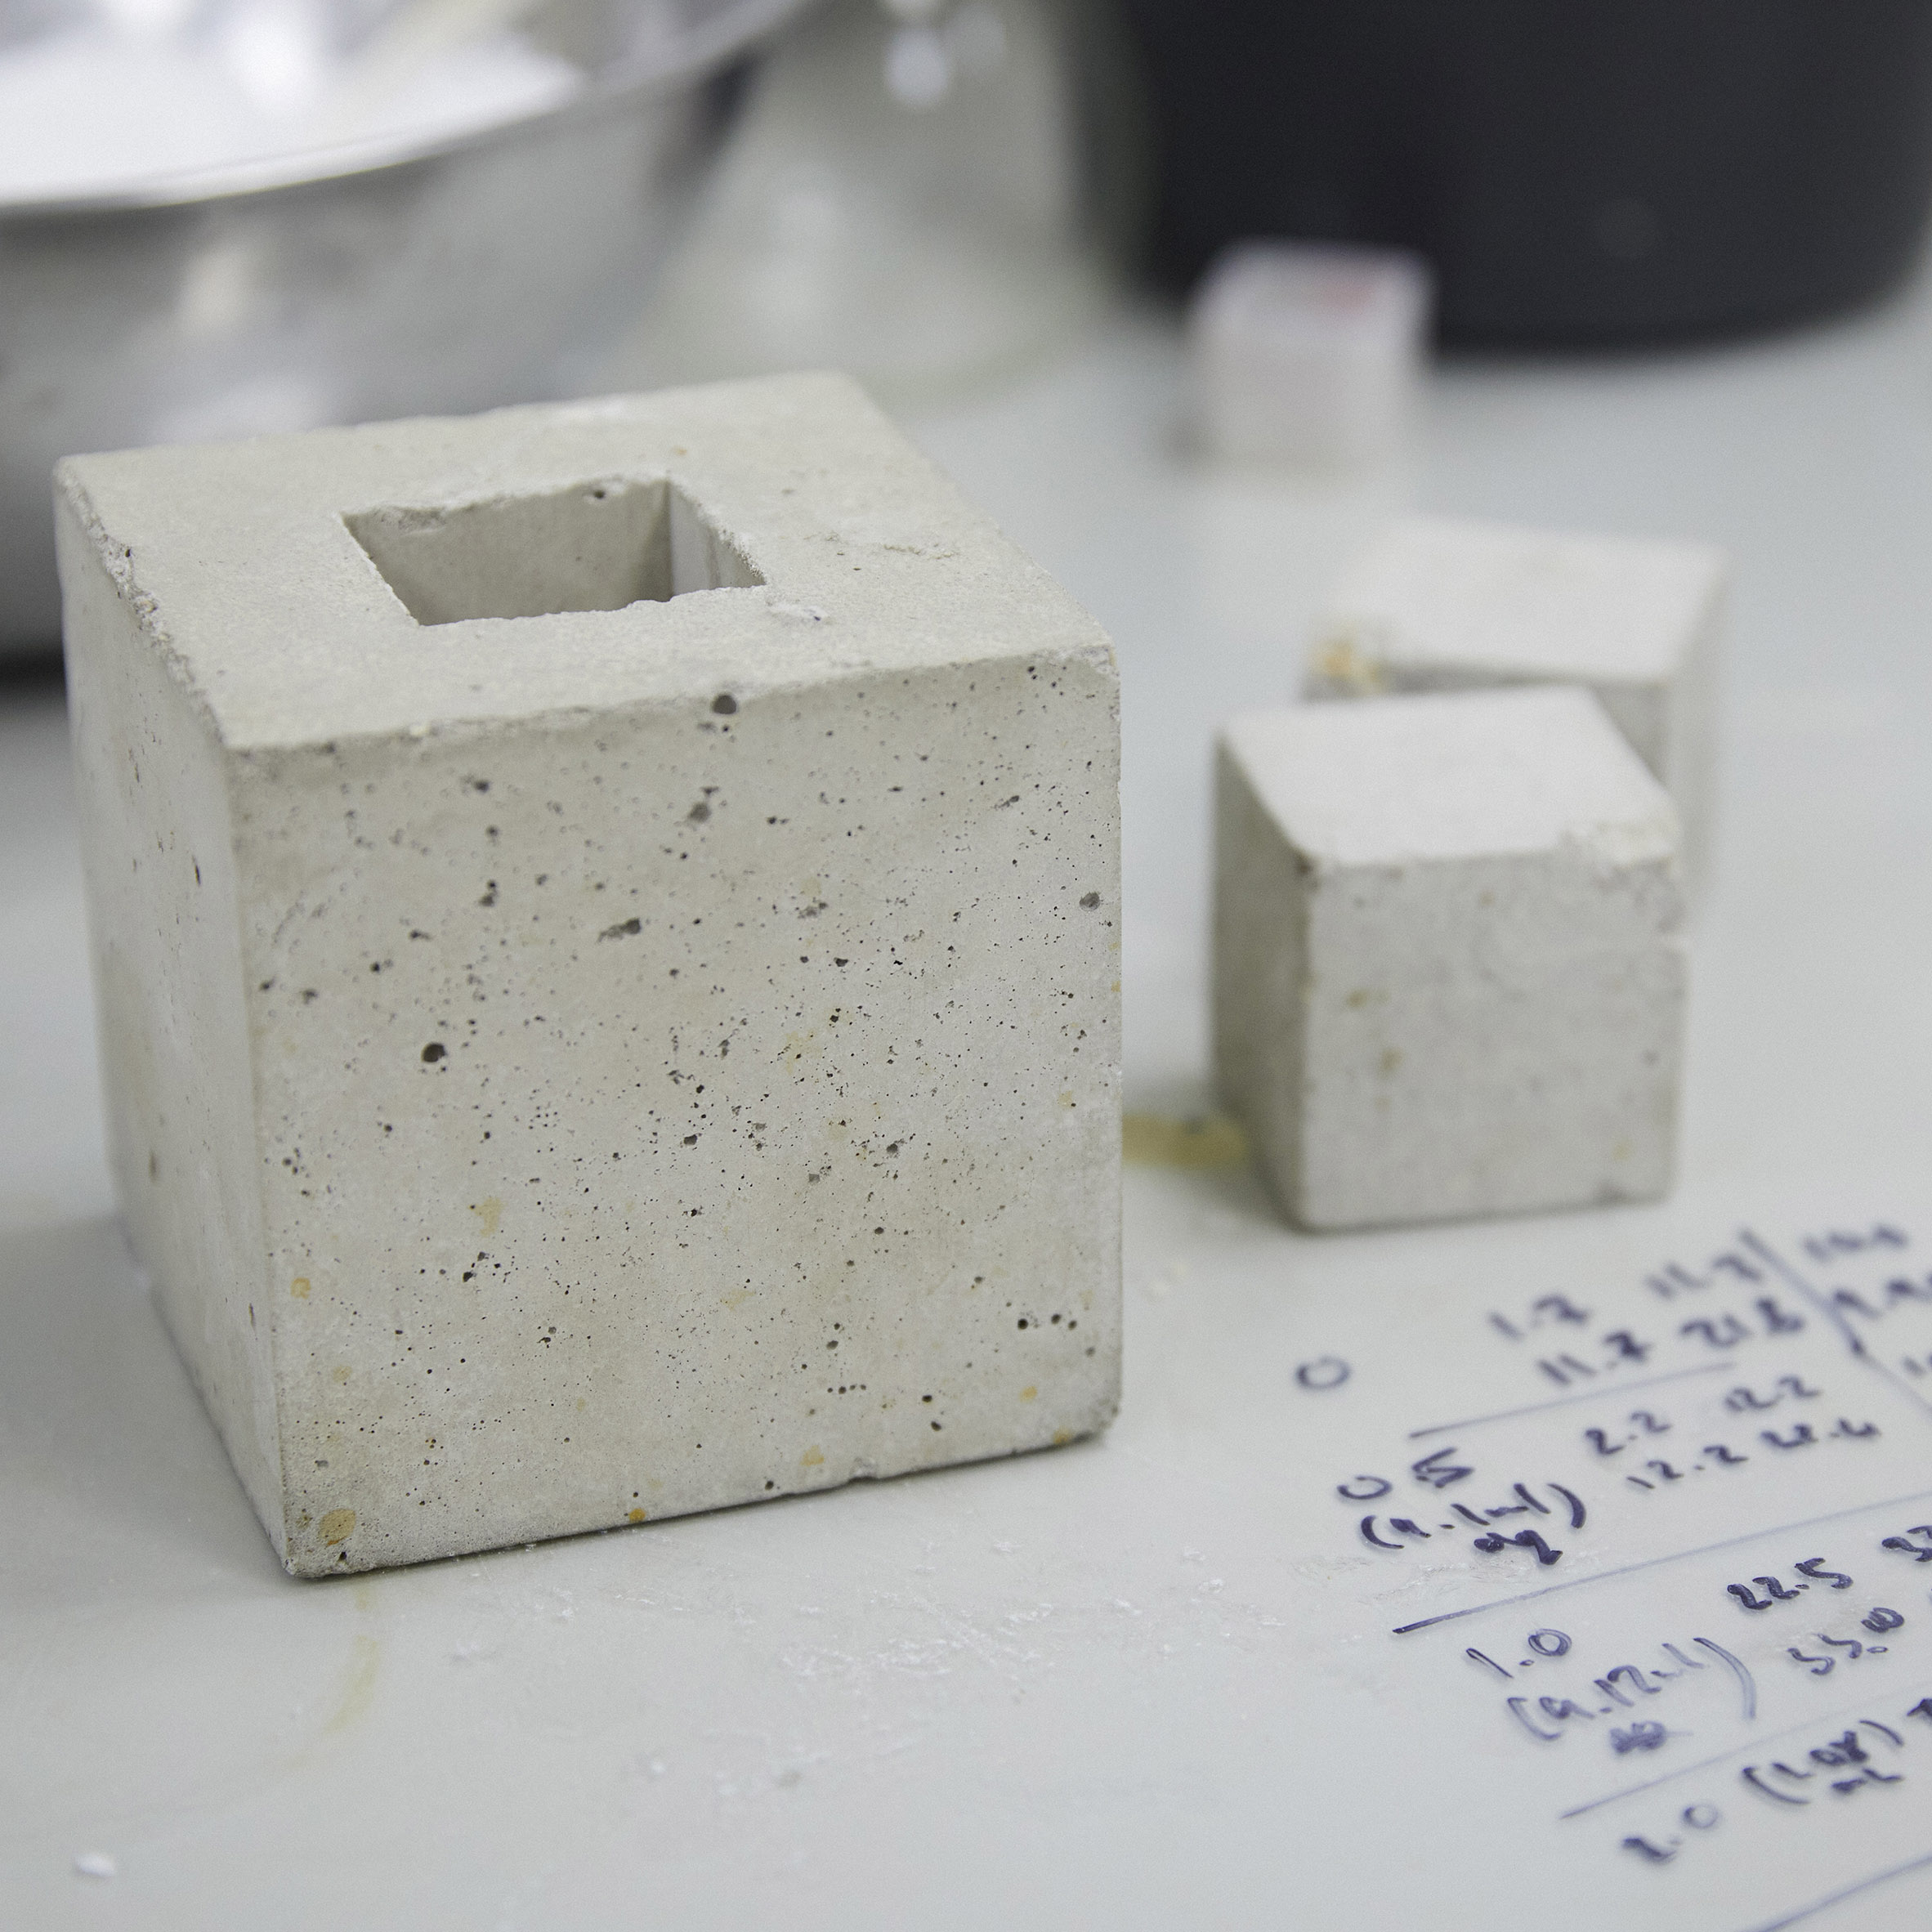 This Carbon-Neutral Cement Is the Future of Infrastructure